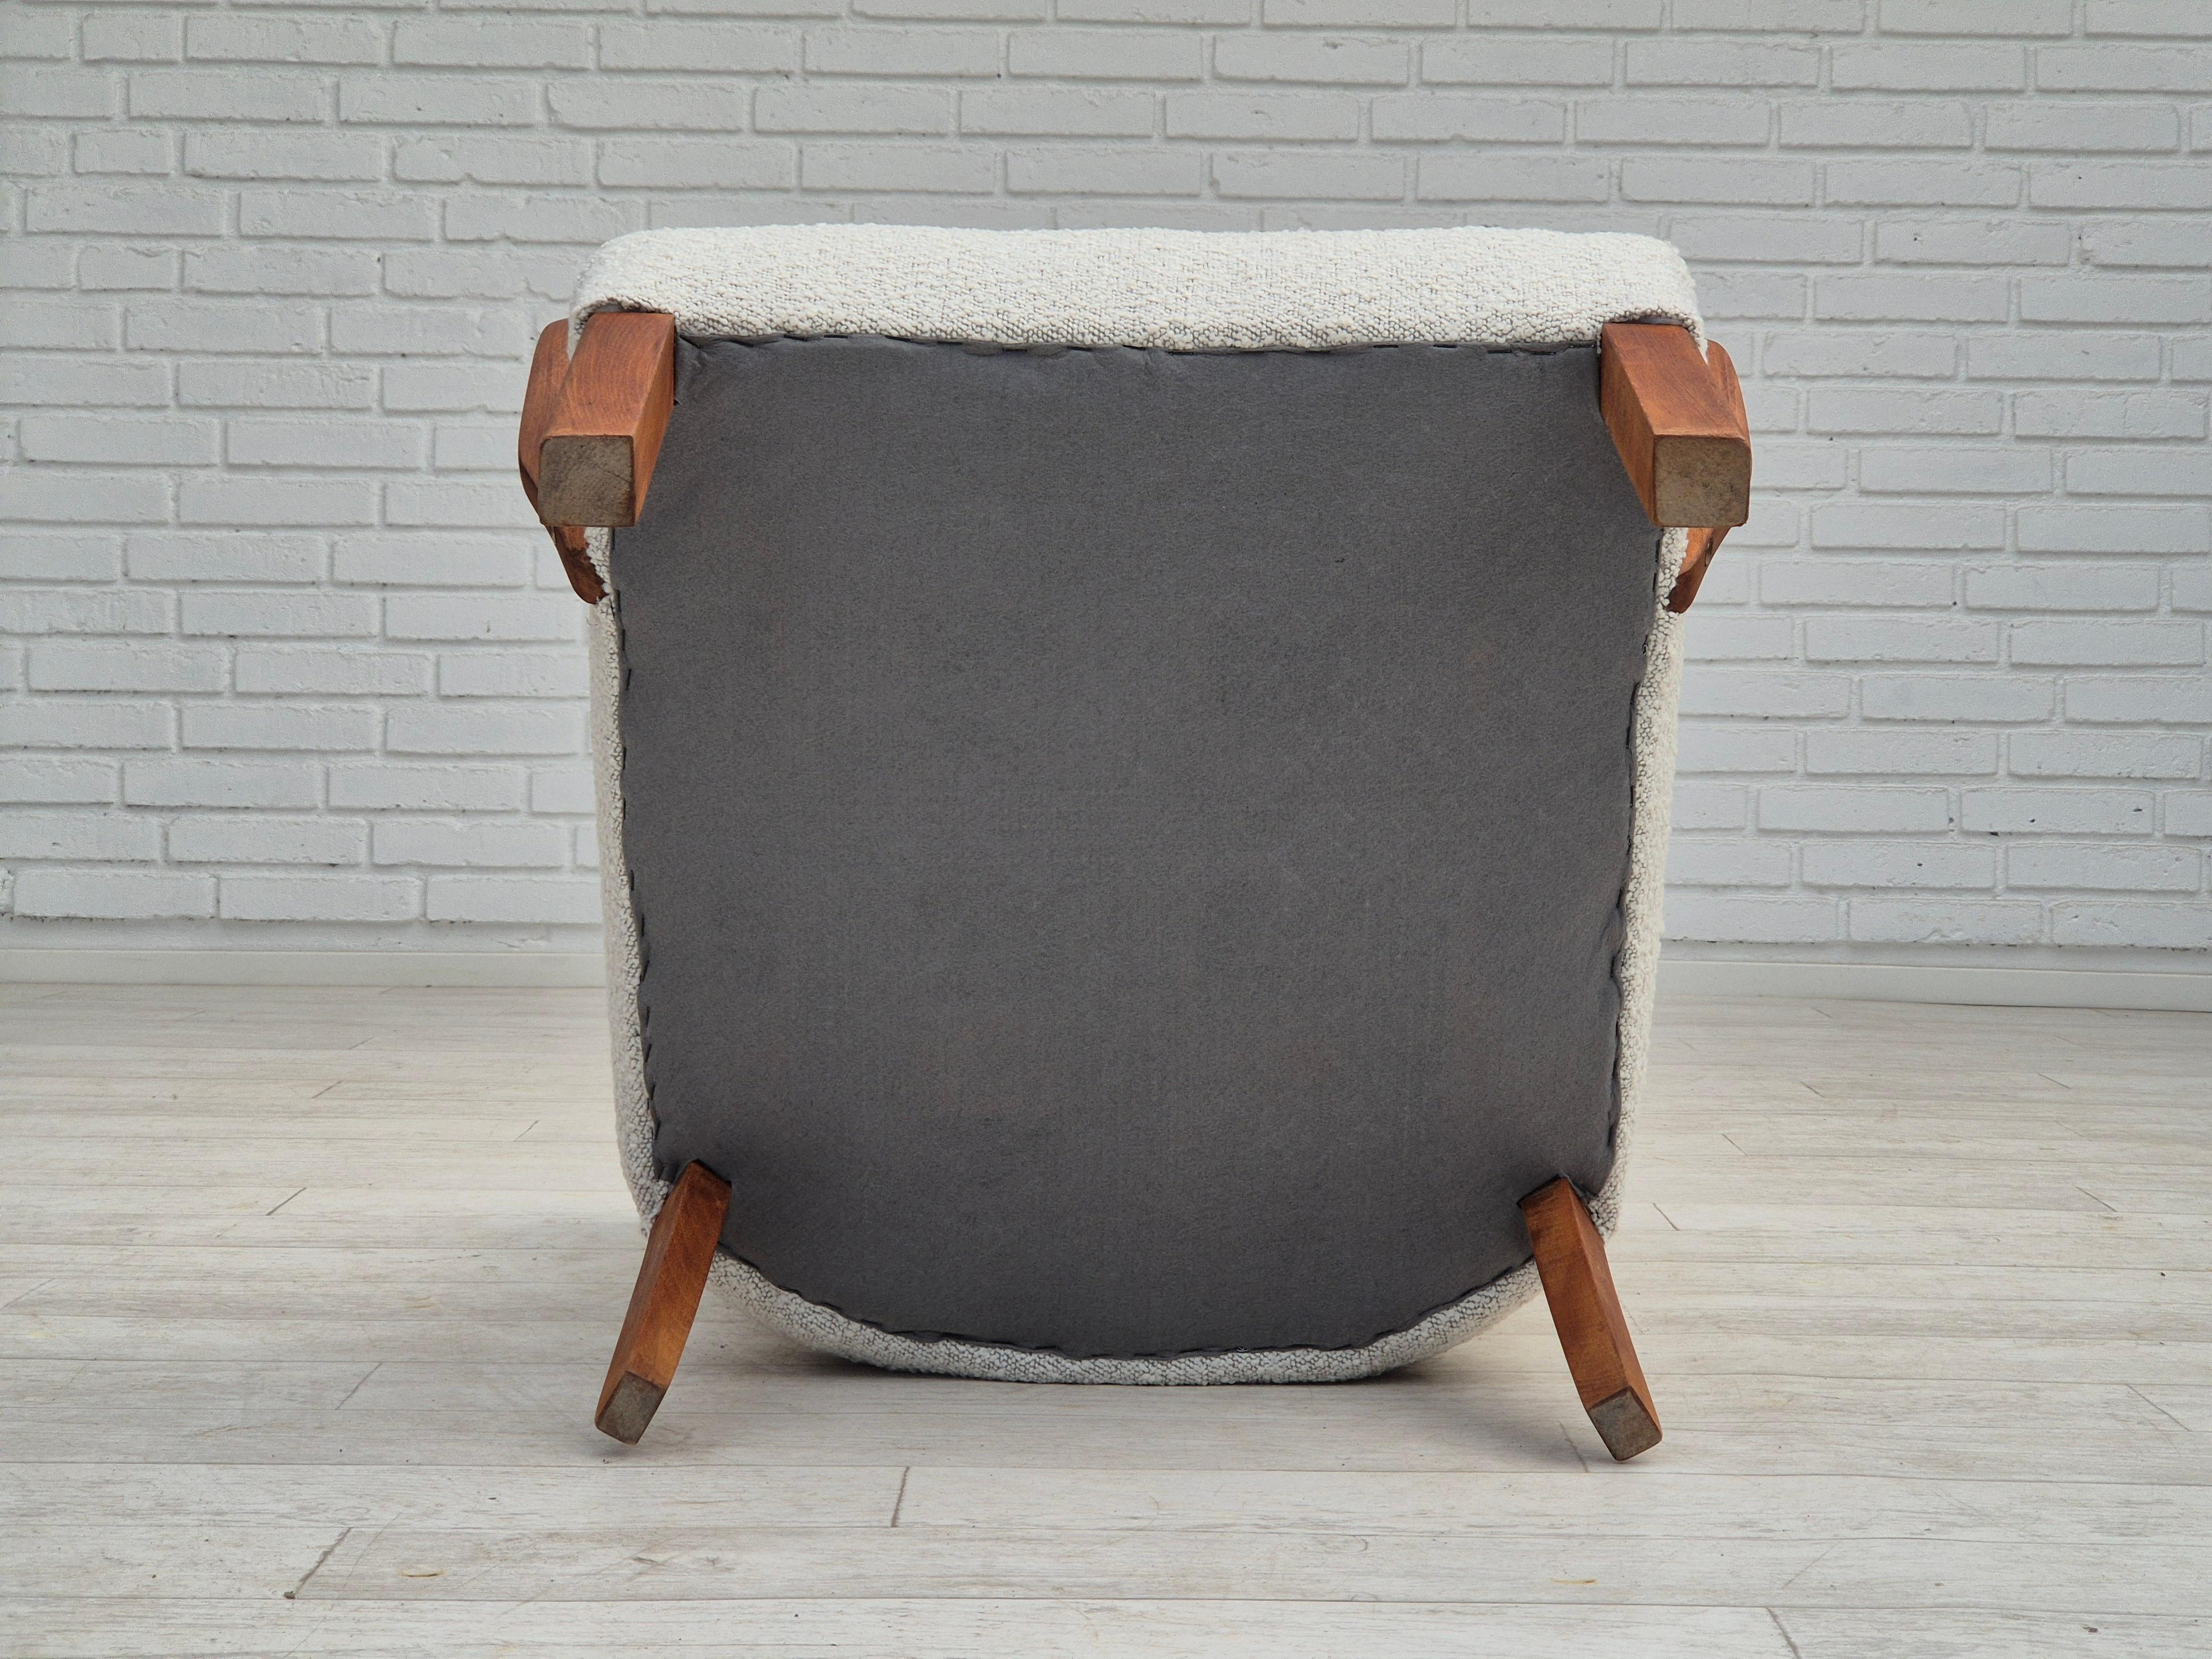 1960s, reupholstered Danish art-deco armchair, beech wood, leather. For Sale 7